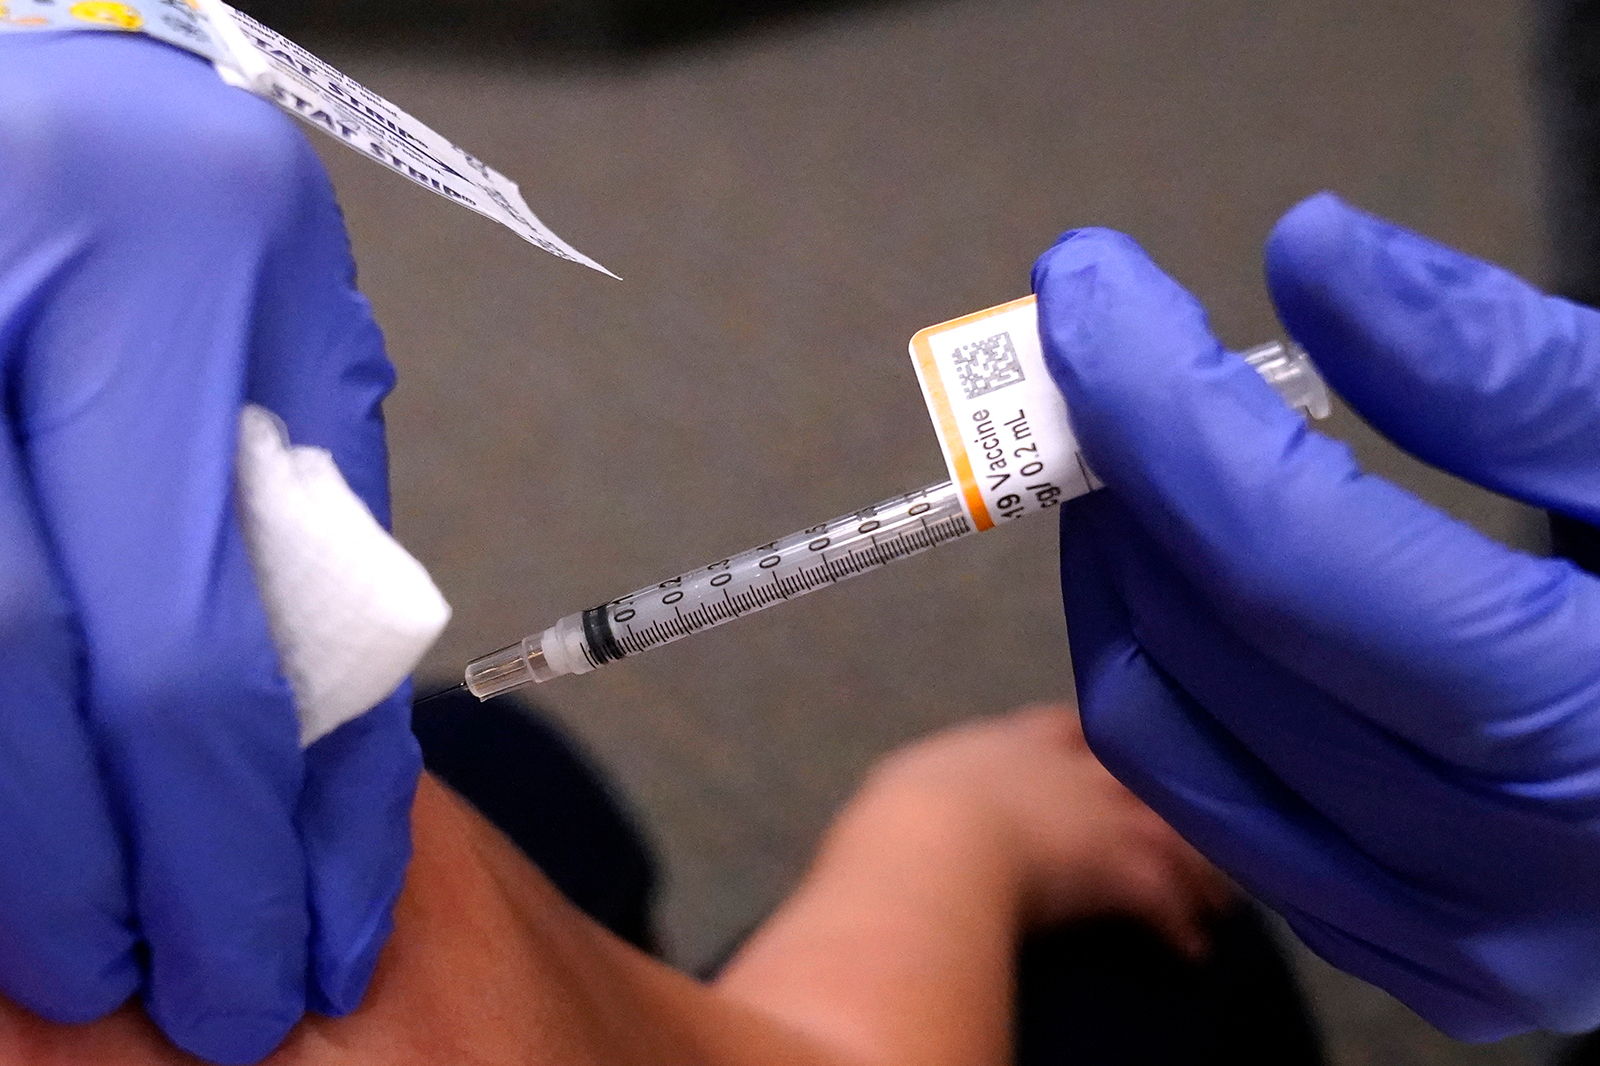 An eight-year-old child receives a second dose of the Pfizer Covid-19 vaccine at Northwest Community Church in Chicago, Saturday, Dec. 11.